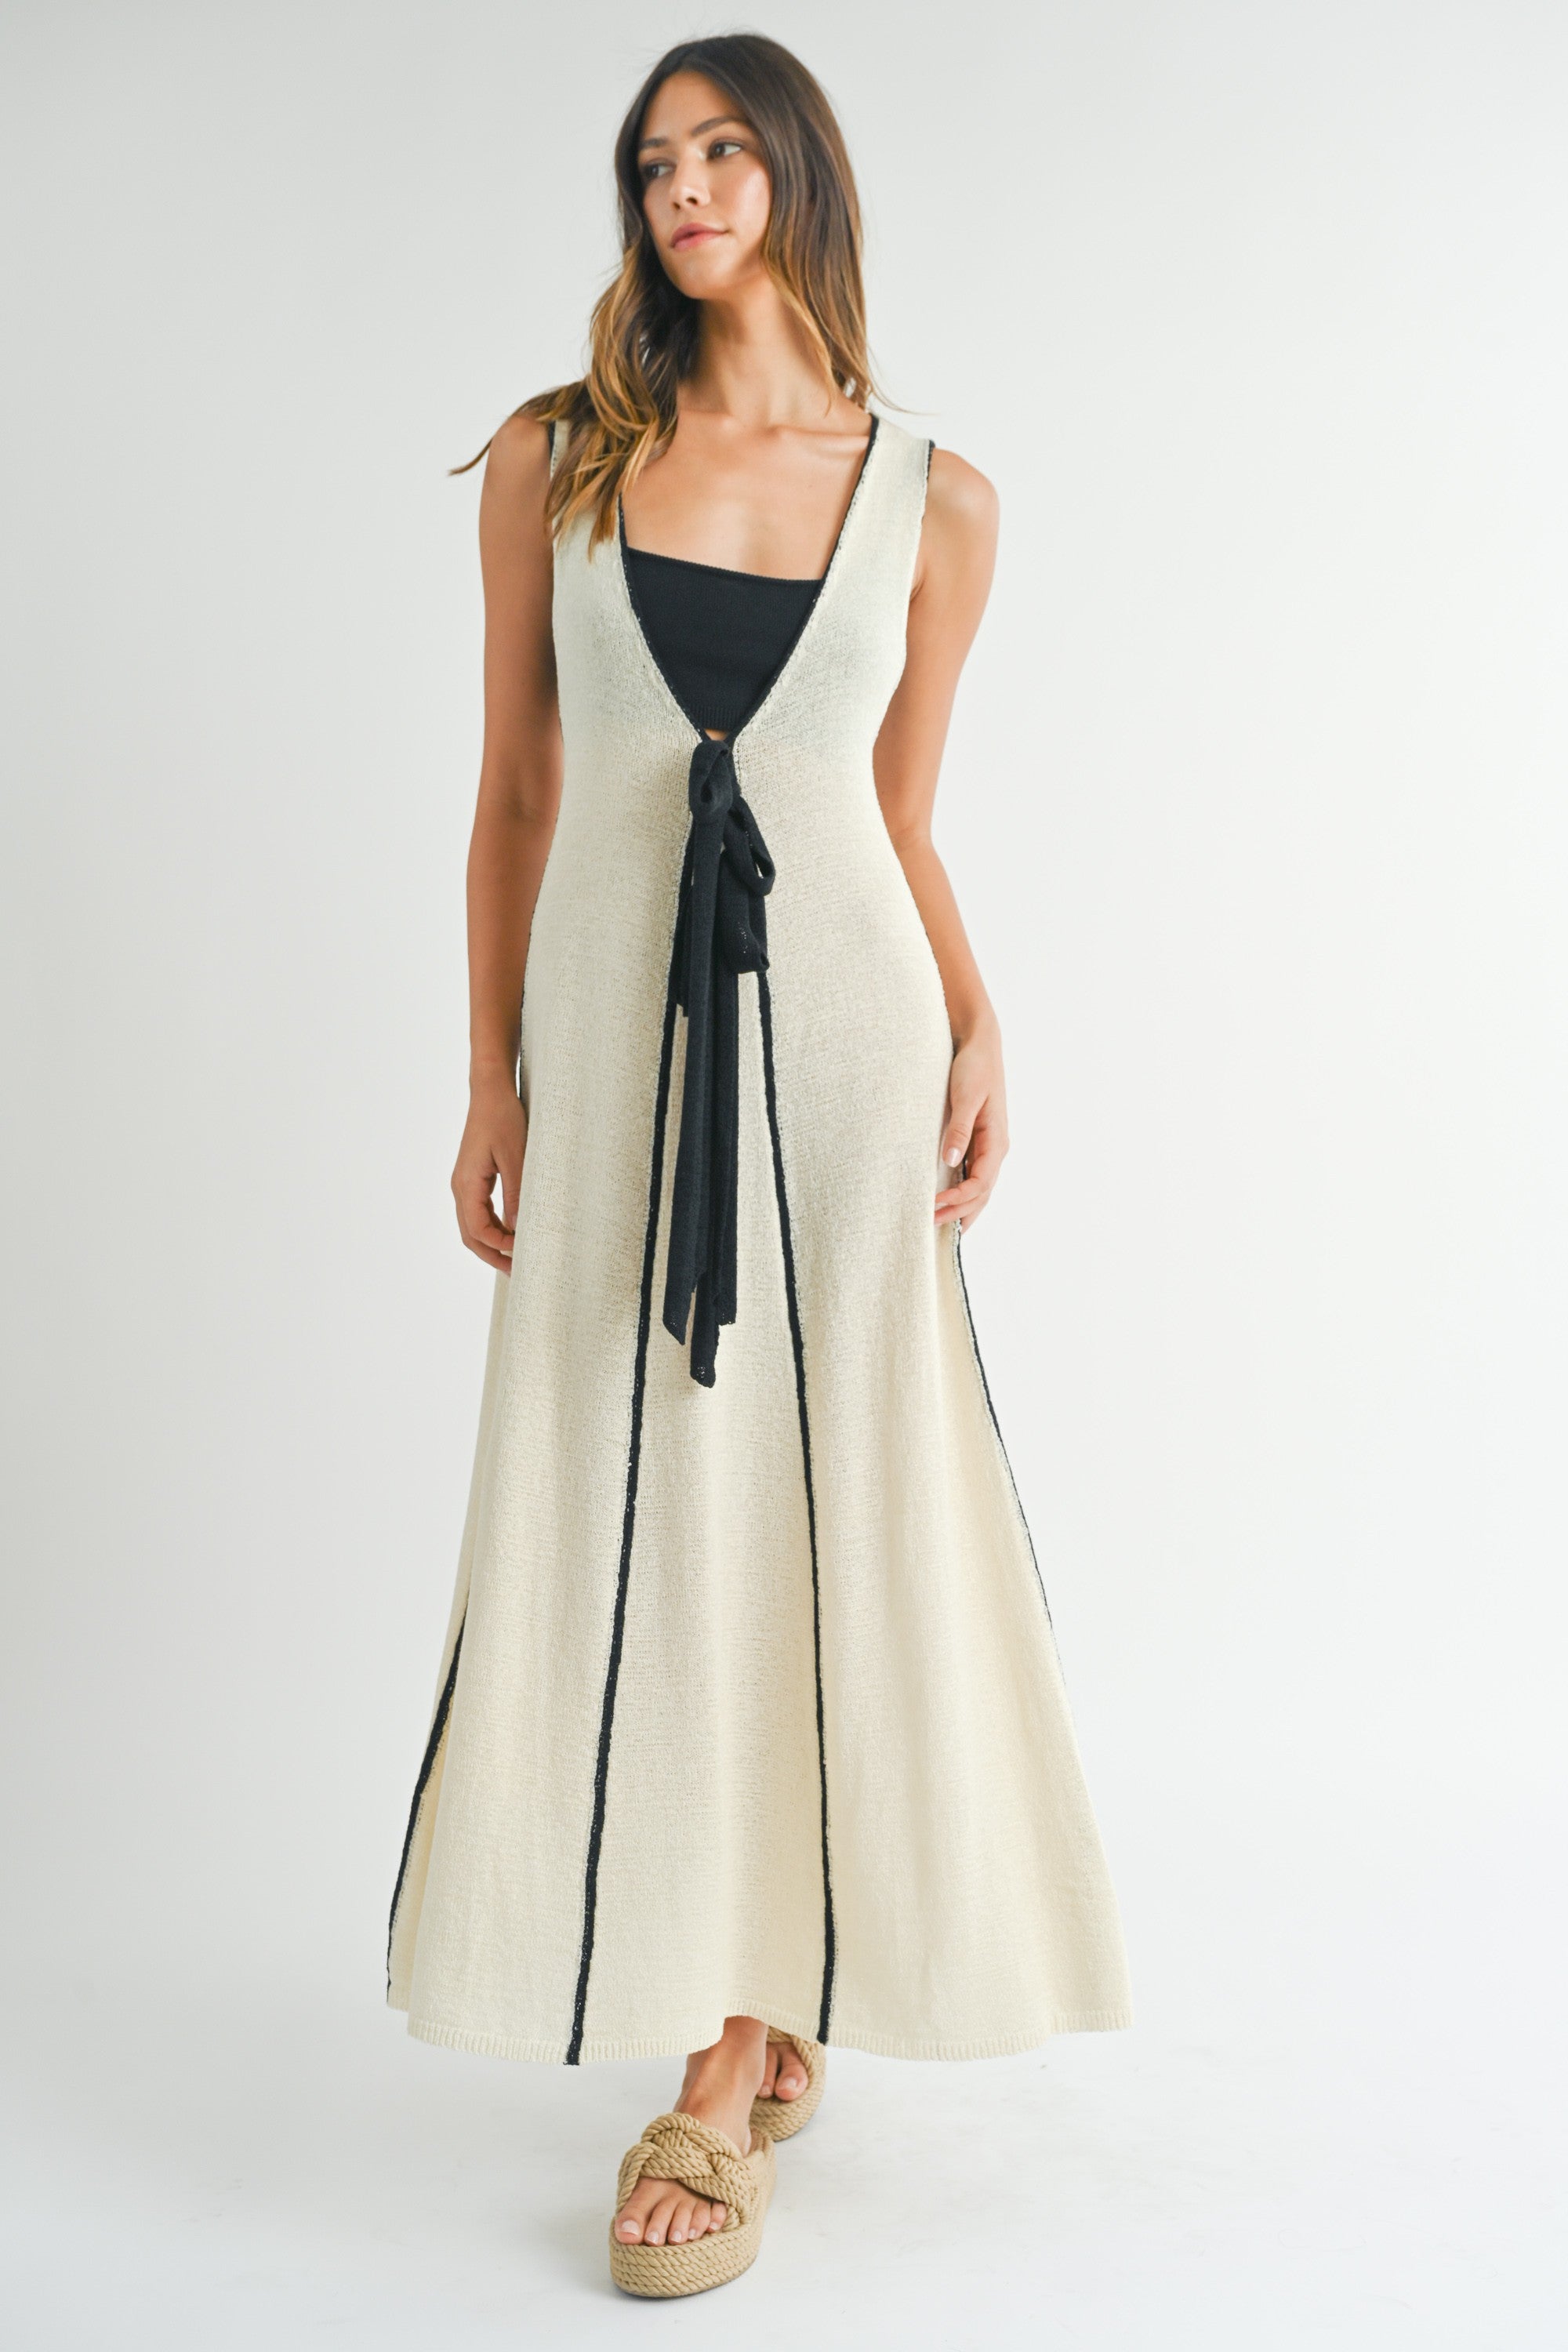 Plunging Neckline with Biding Maxi Dress | Collective Request 